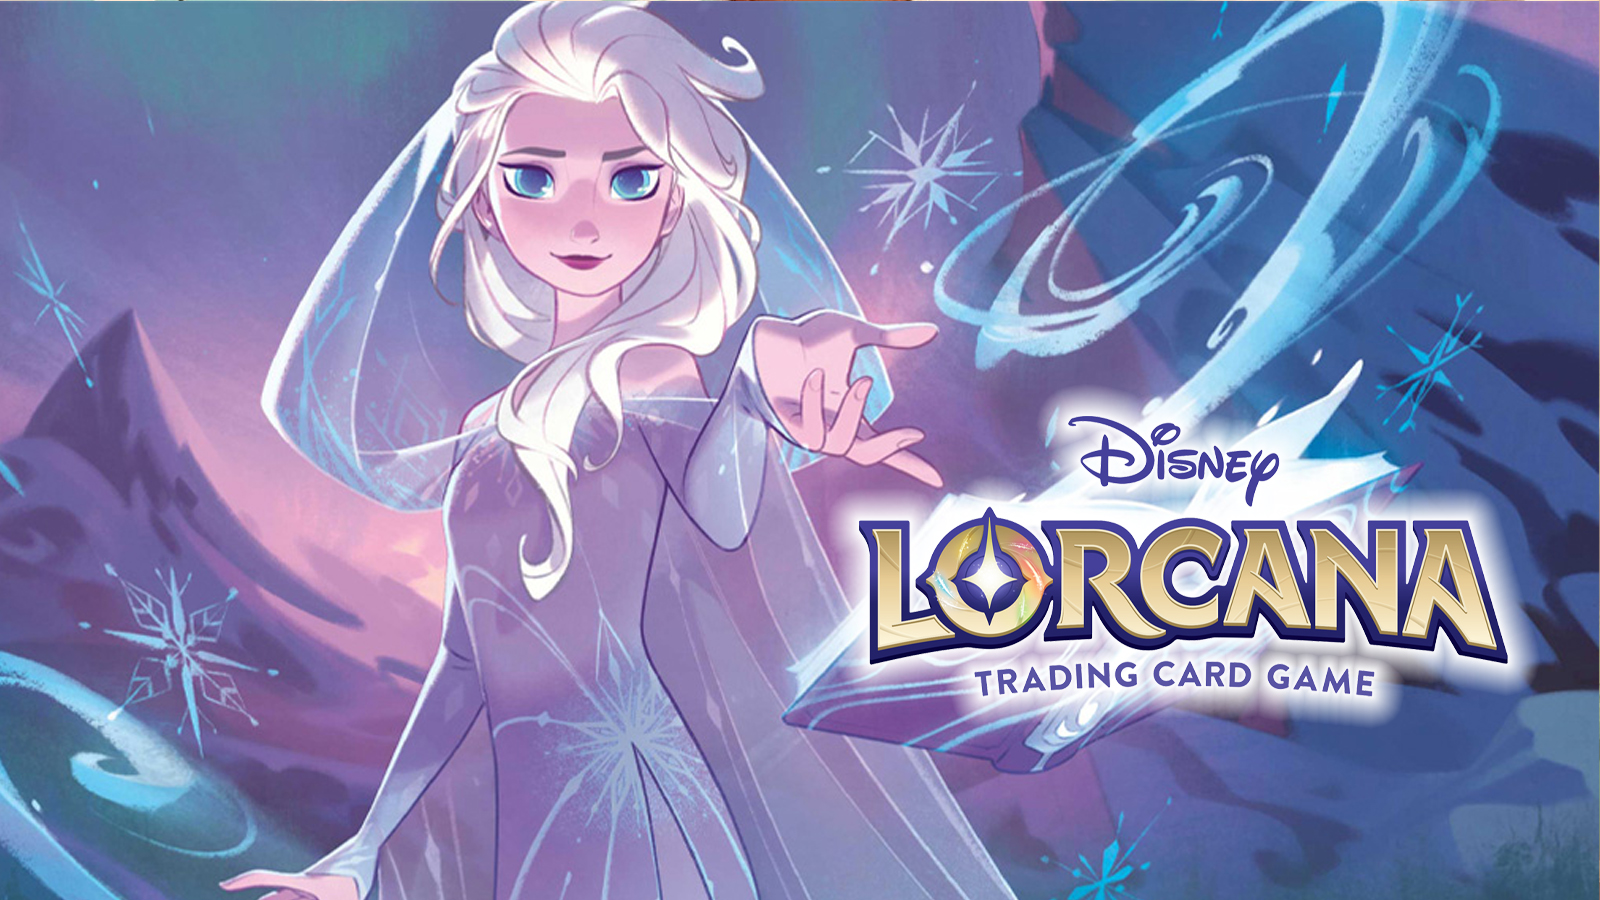 Exclusive Disney Lorcana release date and pricing info